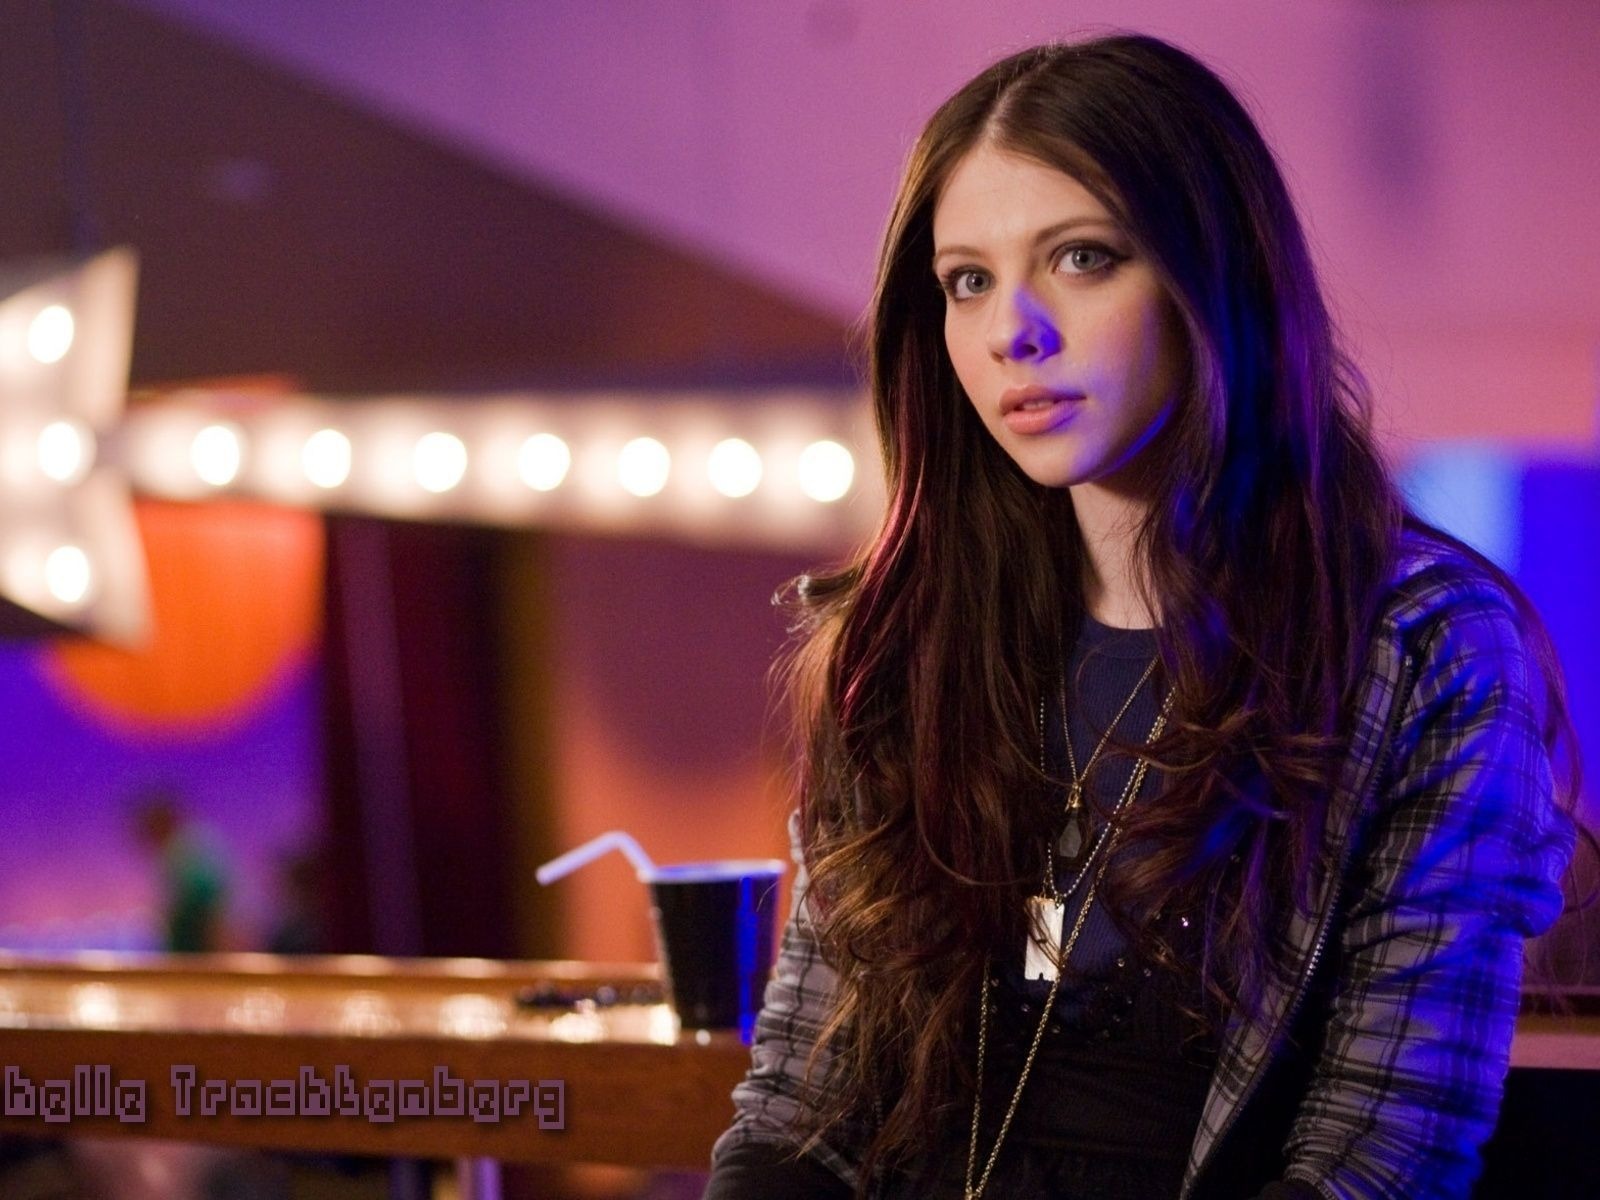 Michelle Trachtenberg #011 - 1600x1200 Wallpapers Pictures Photos Images